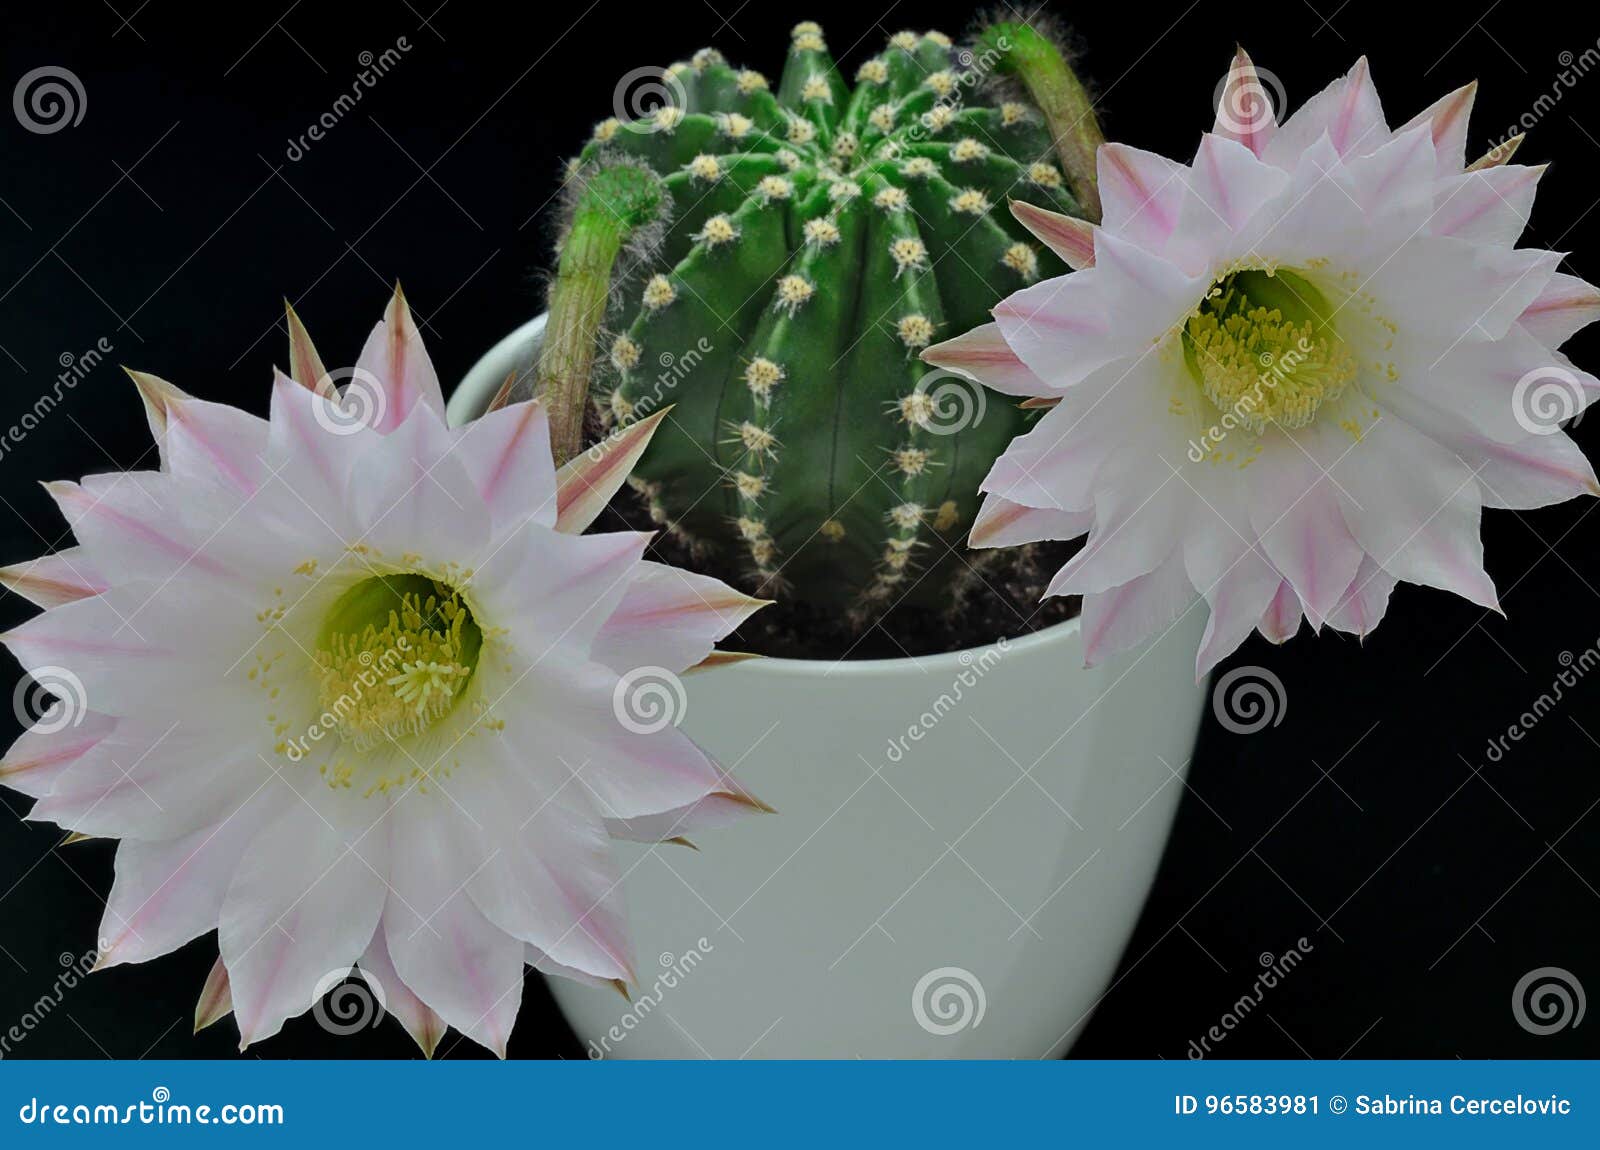 Queen of the Night Cactus with Blossoms Stock Image - Image of buds, cacti:  96583981